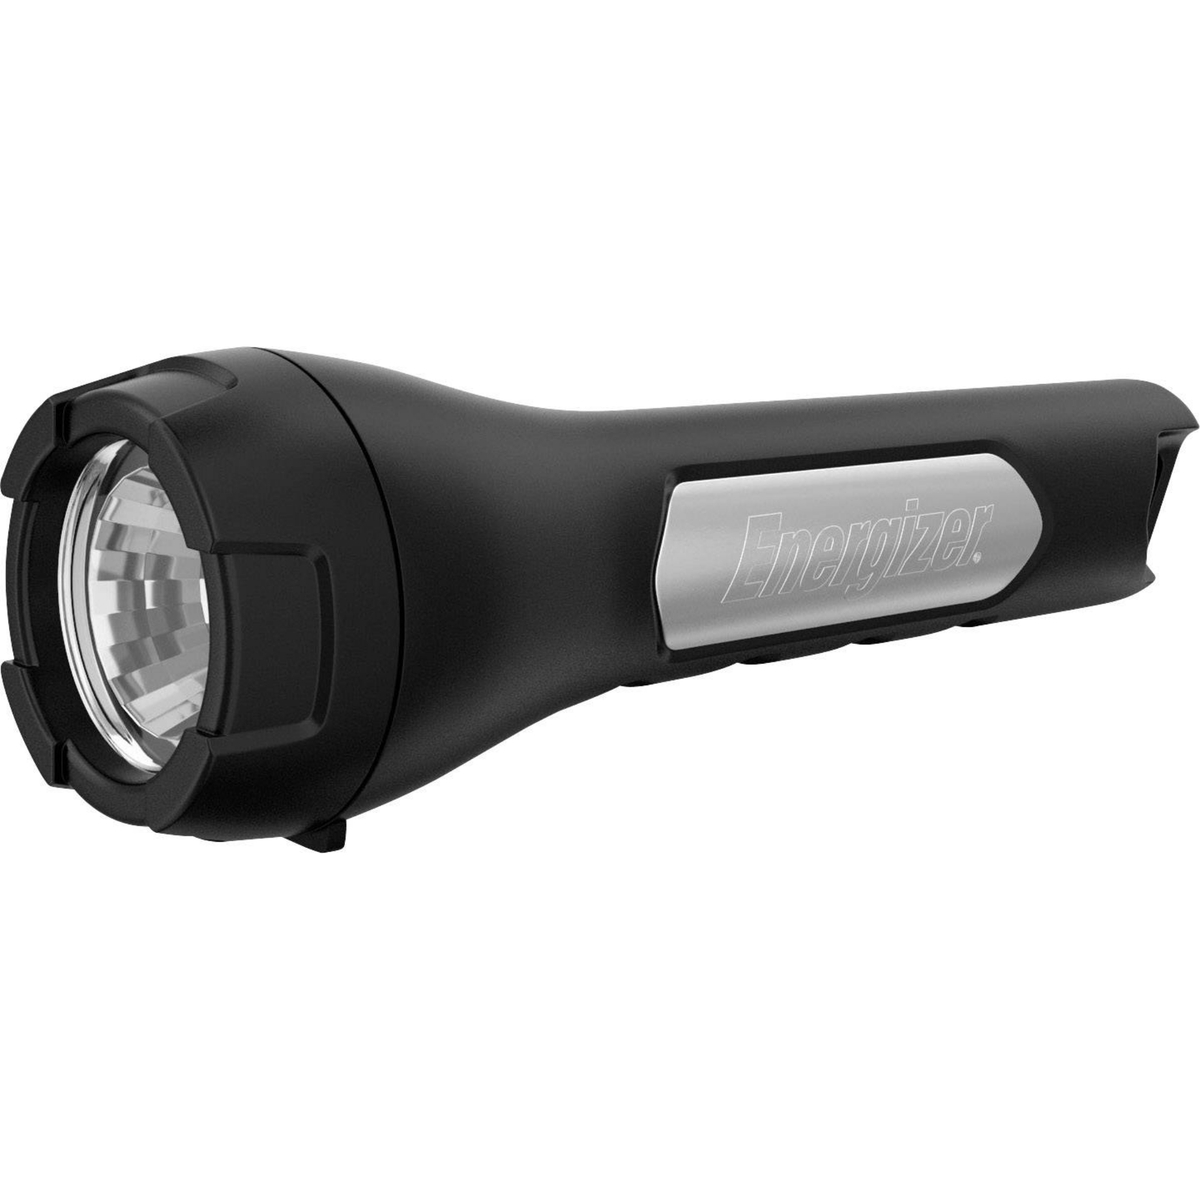 Energizer Touch Tech LED 50 lumens Torch with 2 AA Batteries, THH21